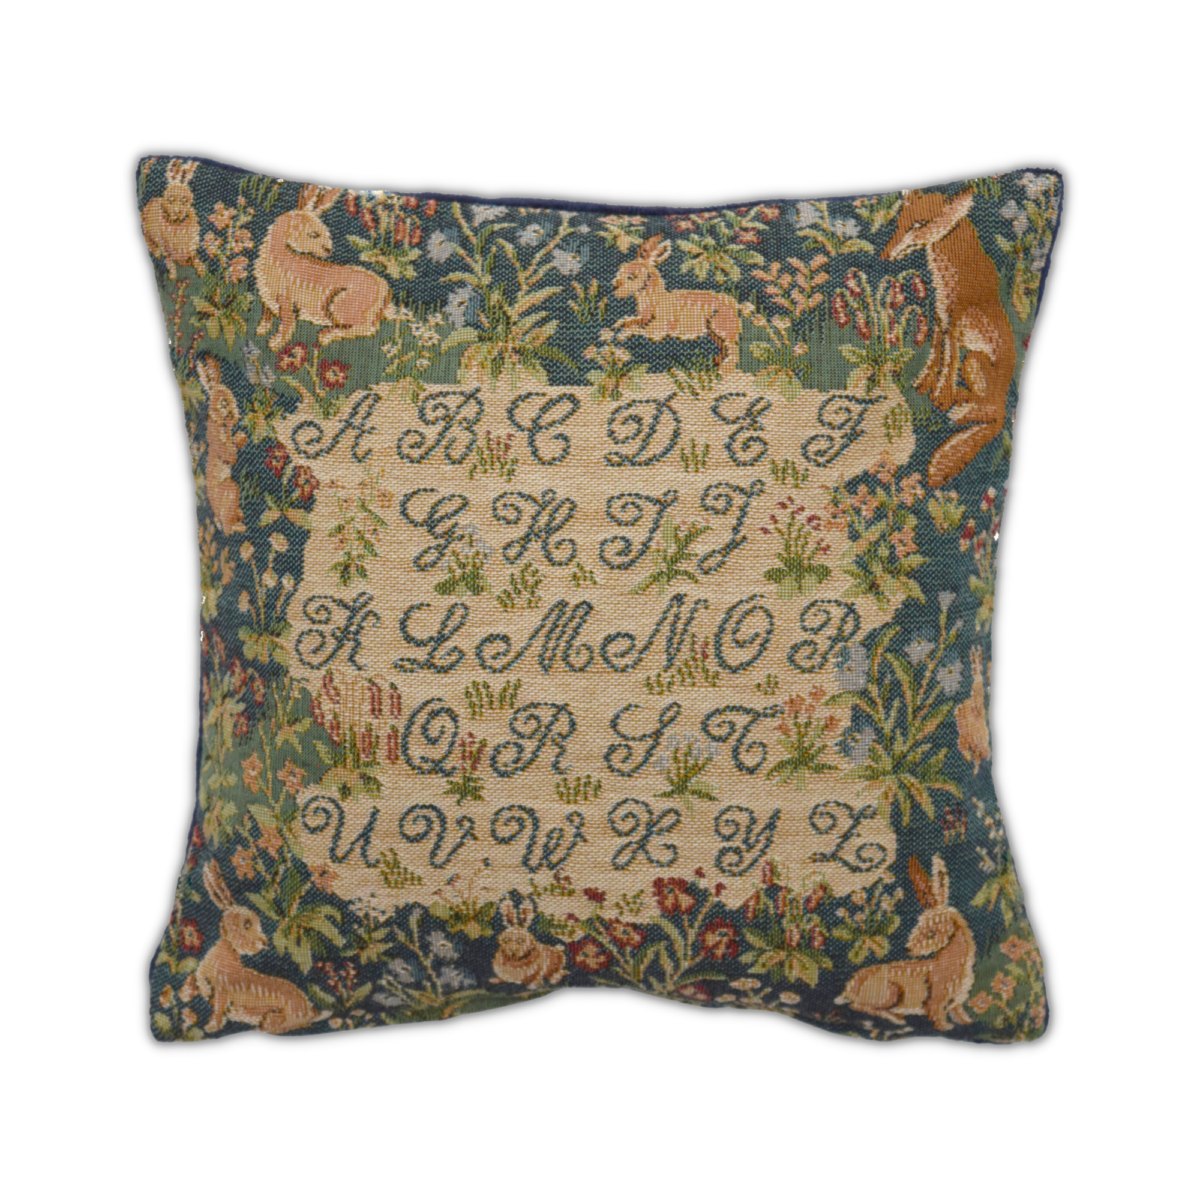 Image of Medieval Animal Sampler Cushion Cover